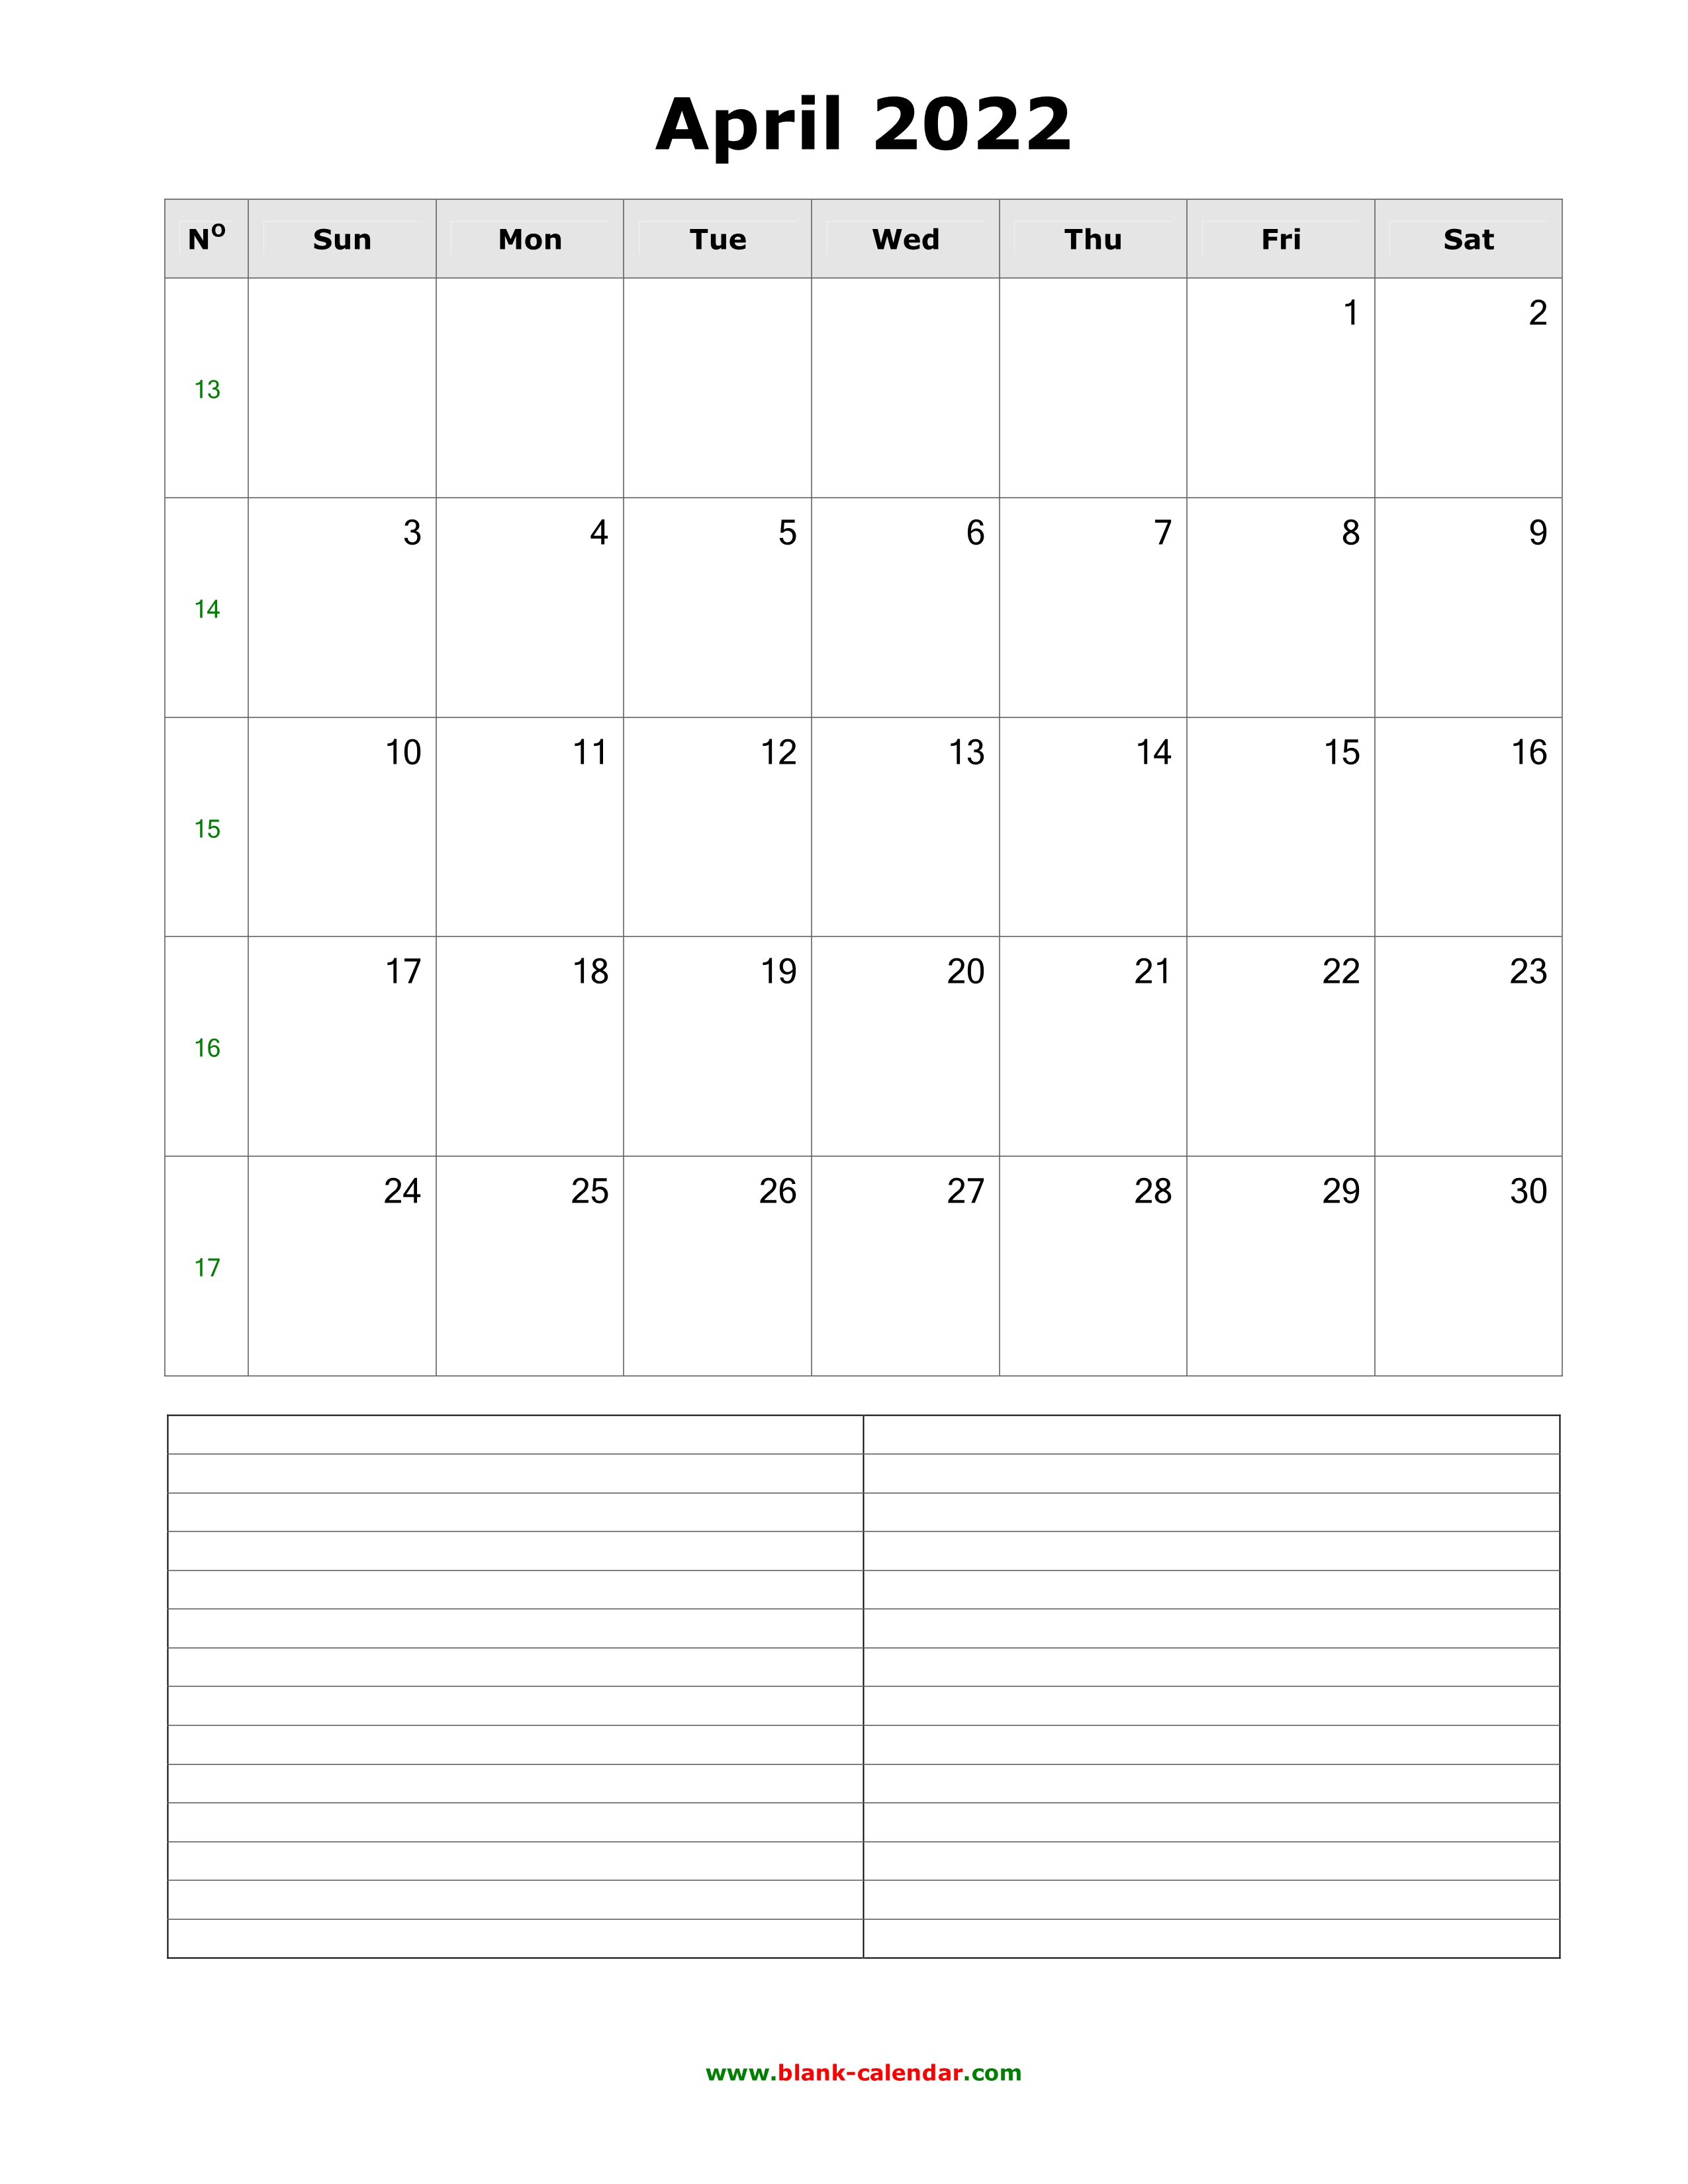 Download April 2022 Blank Calendar With Space For Notes (Vertical)